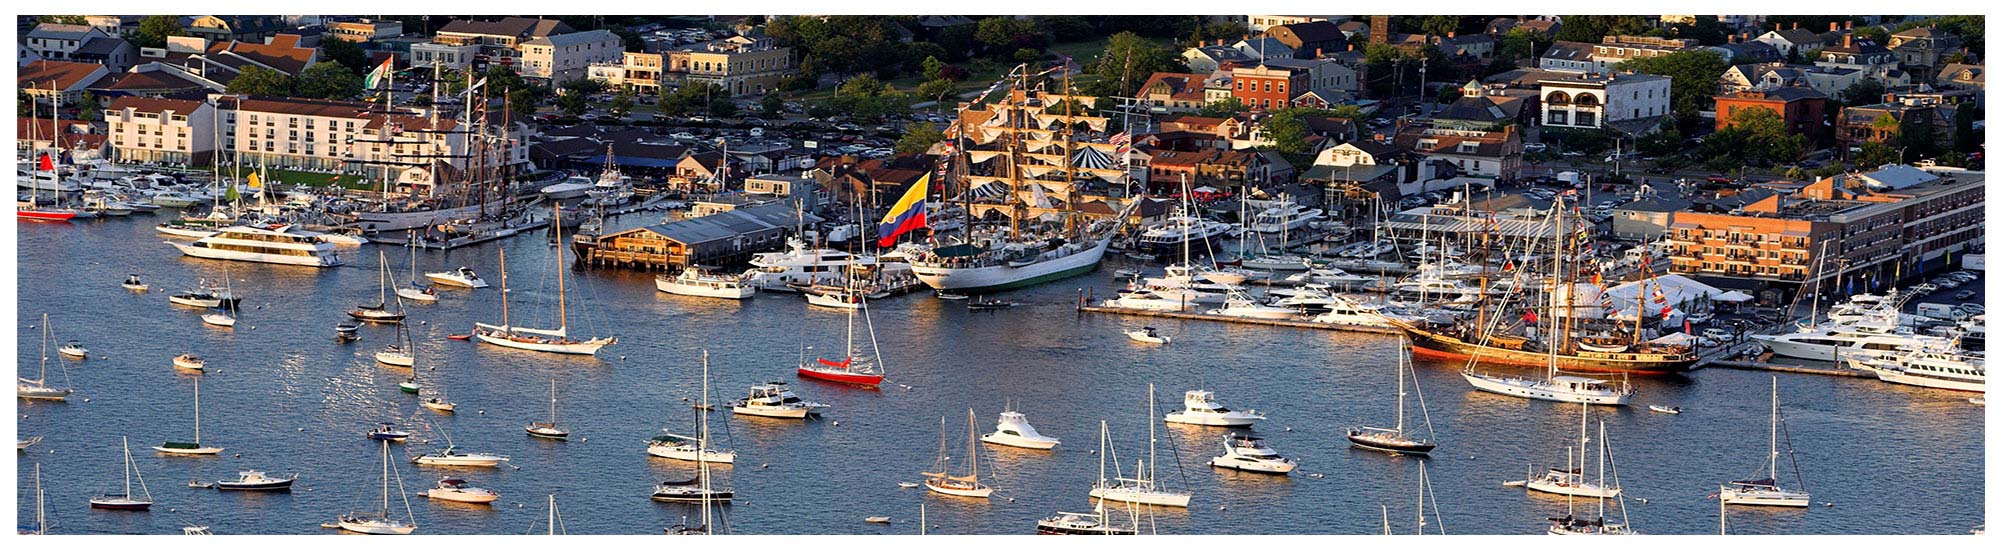 Newport RI boating and sailing information including charters and dockage facilities